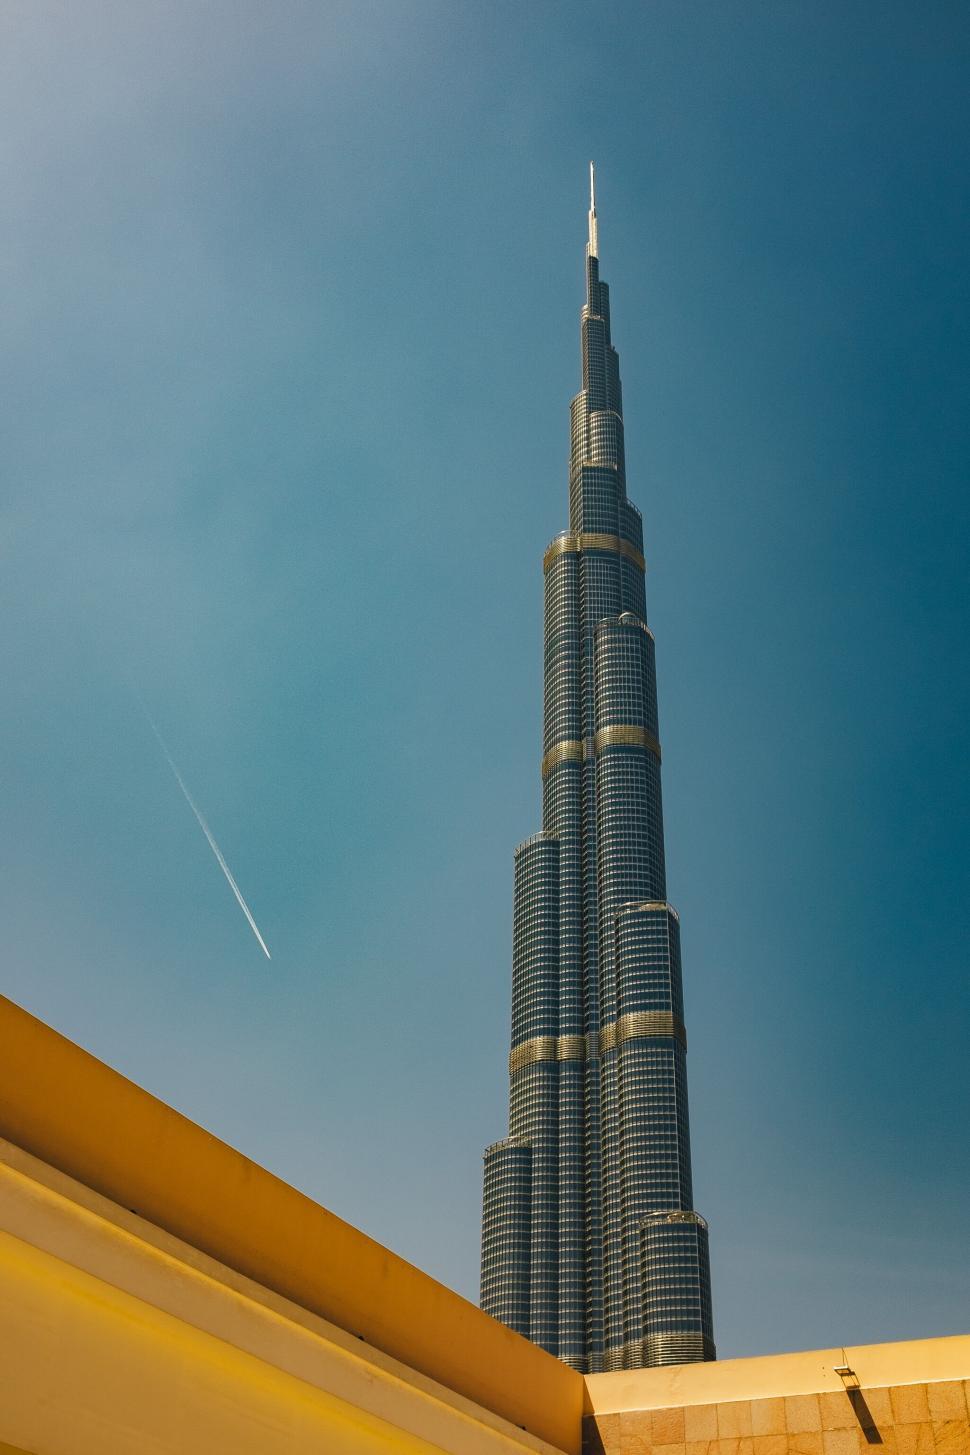 Free Image of A tall building with a jet in the sky with burj khalifa in the background 